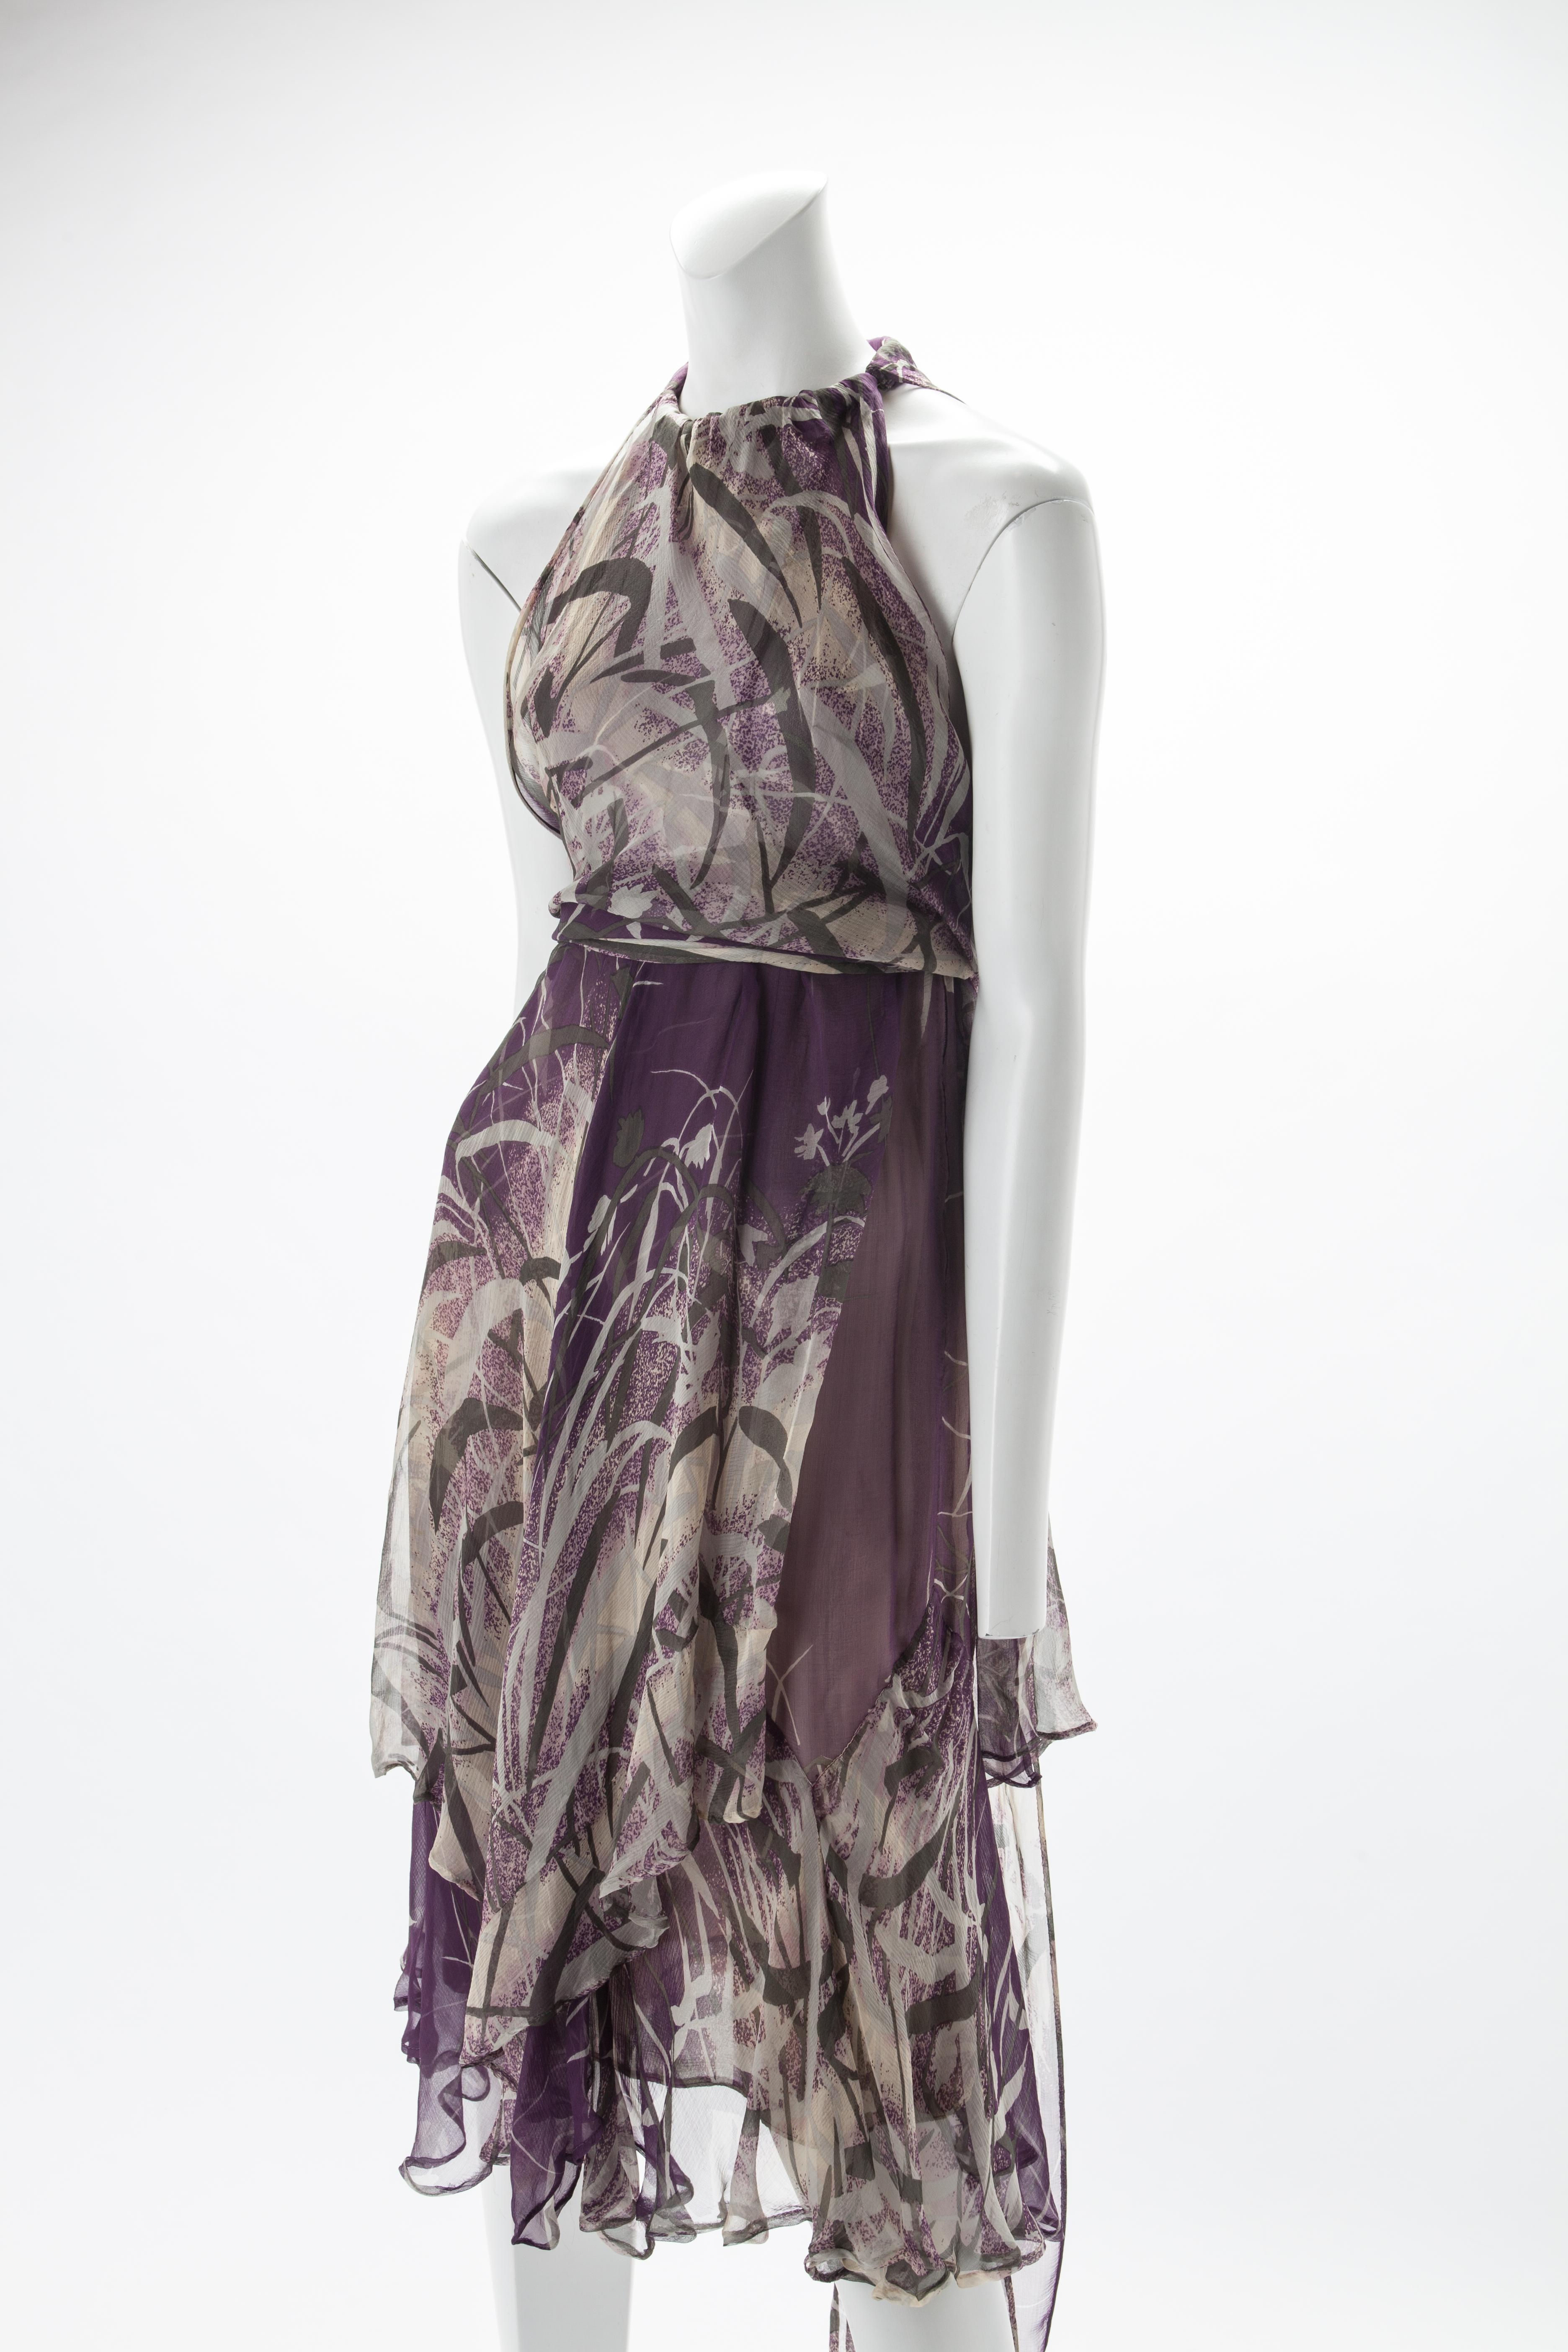 Yves Saint Laurent Couture Foliage Printed Silk Chiffon Cocktail Dress, c.1970s.
Gathered halter neck with self tie belt at waist able to be tied at the back, side, or front. 
Multiple tiered silk chiffon layers with circular flounce hem lines.